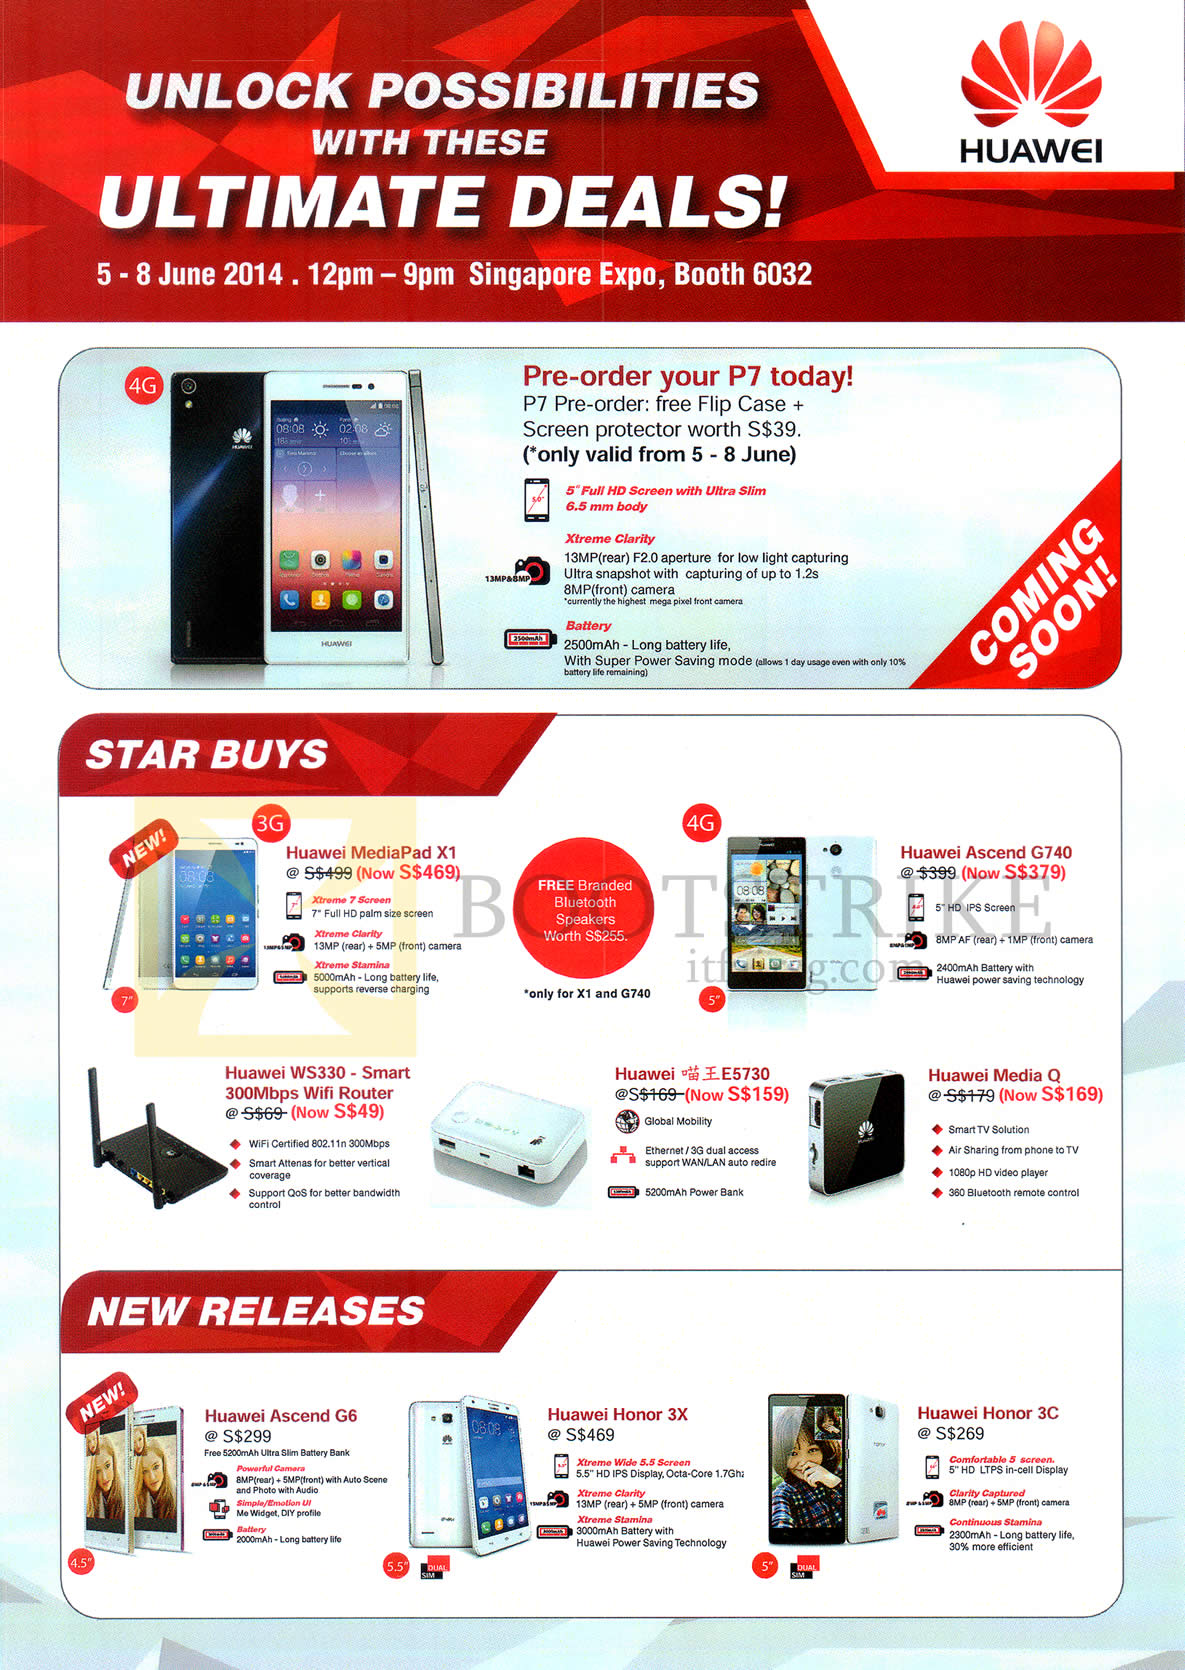 PC SHOW 2014 price list image brochure of Newstead Huawei Mobile Phones, Wifi Routers, MediaPad X1, Ascend G740, G6, Honor 3X, 3C, WS330, E5730, Media Q